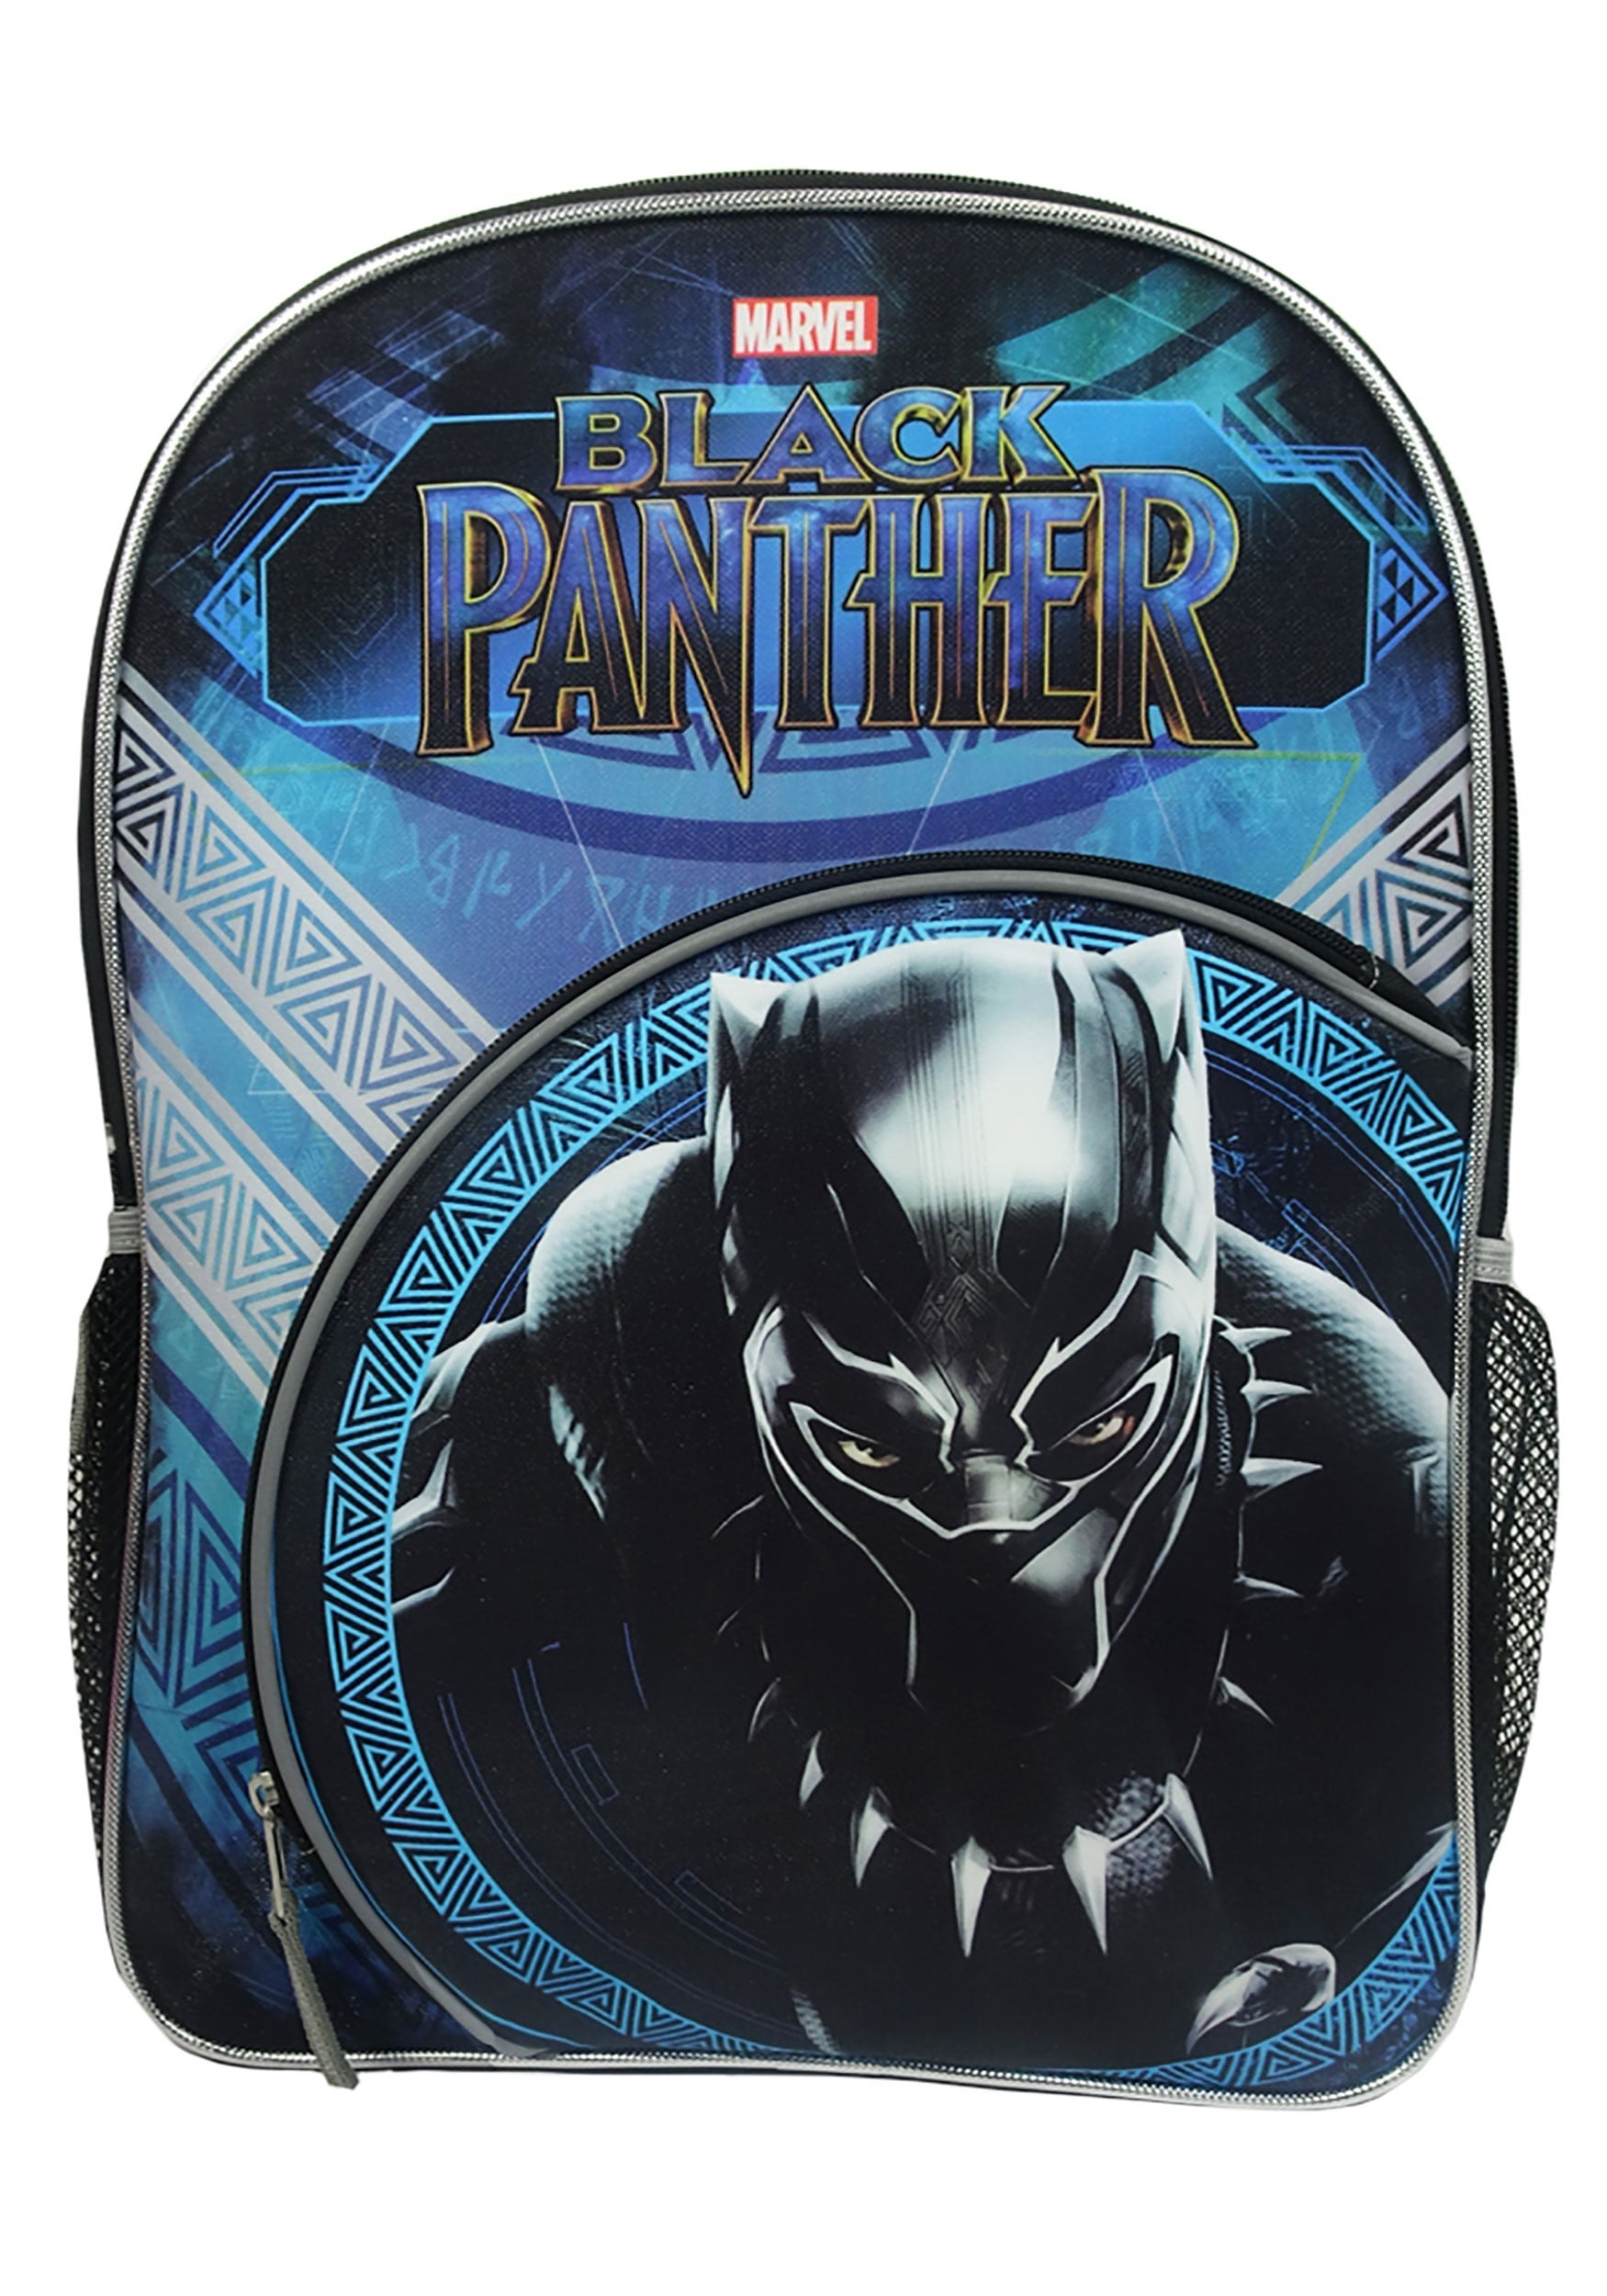 Black Panther “King Of Wakanda” Lunch Box for Sale in Norwalk, CT - OfferUp